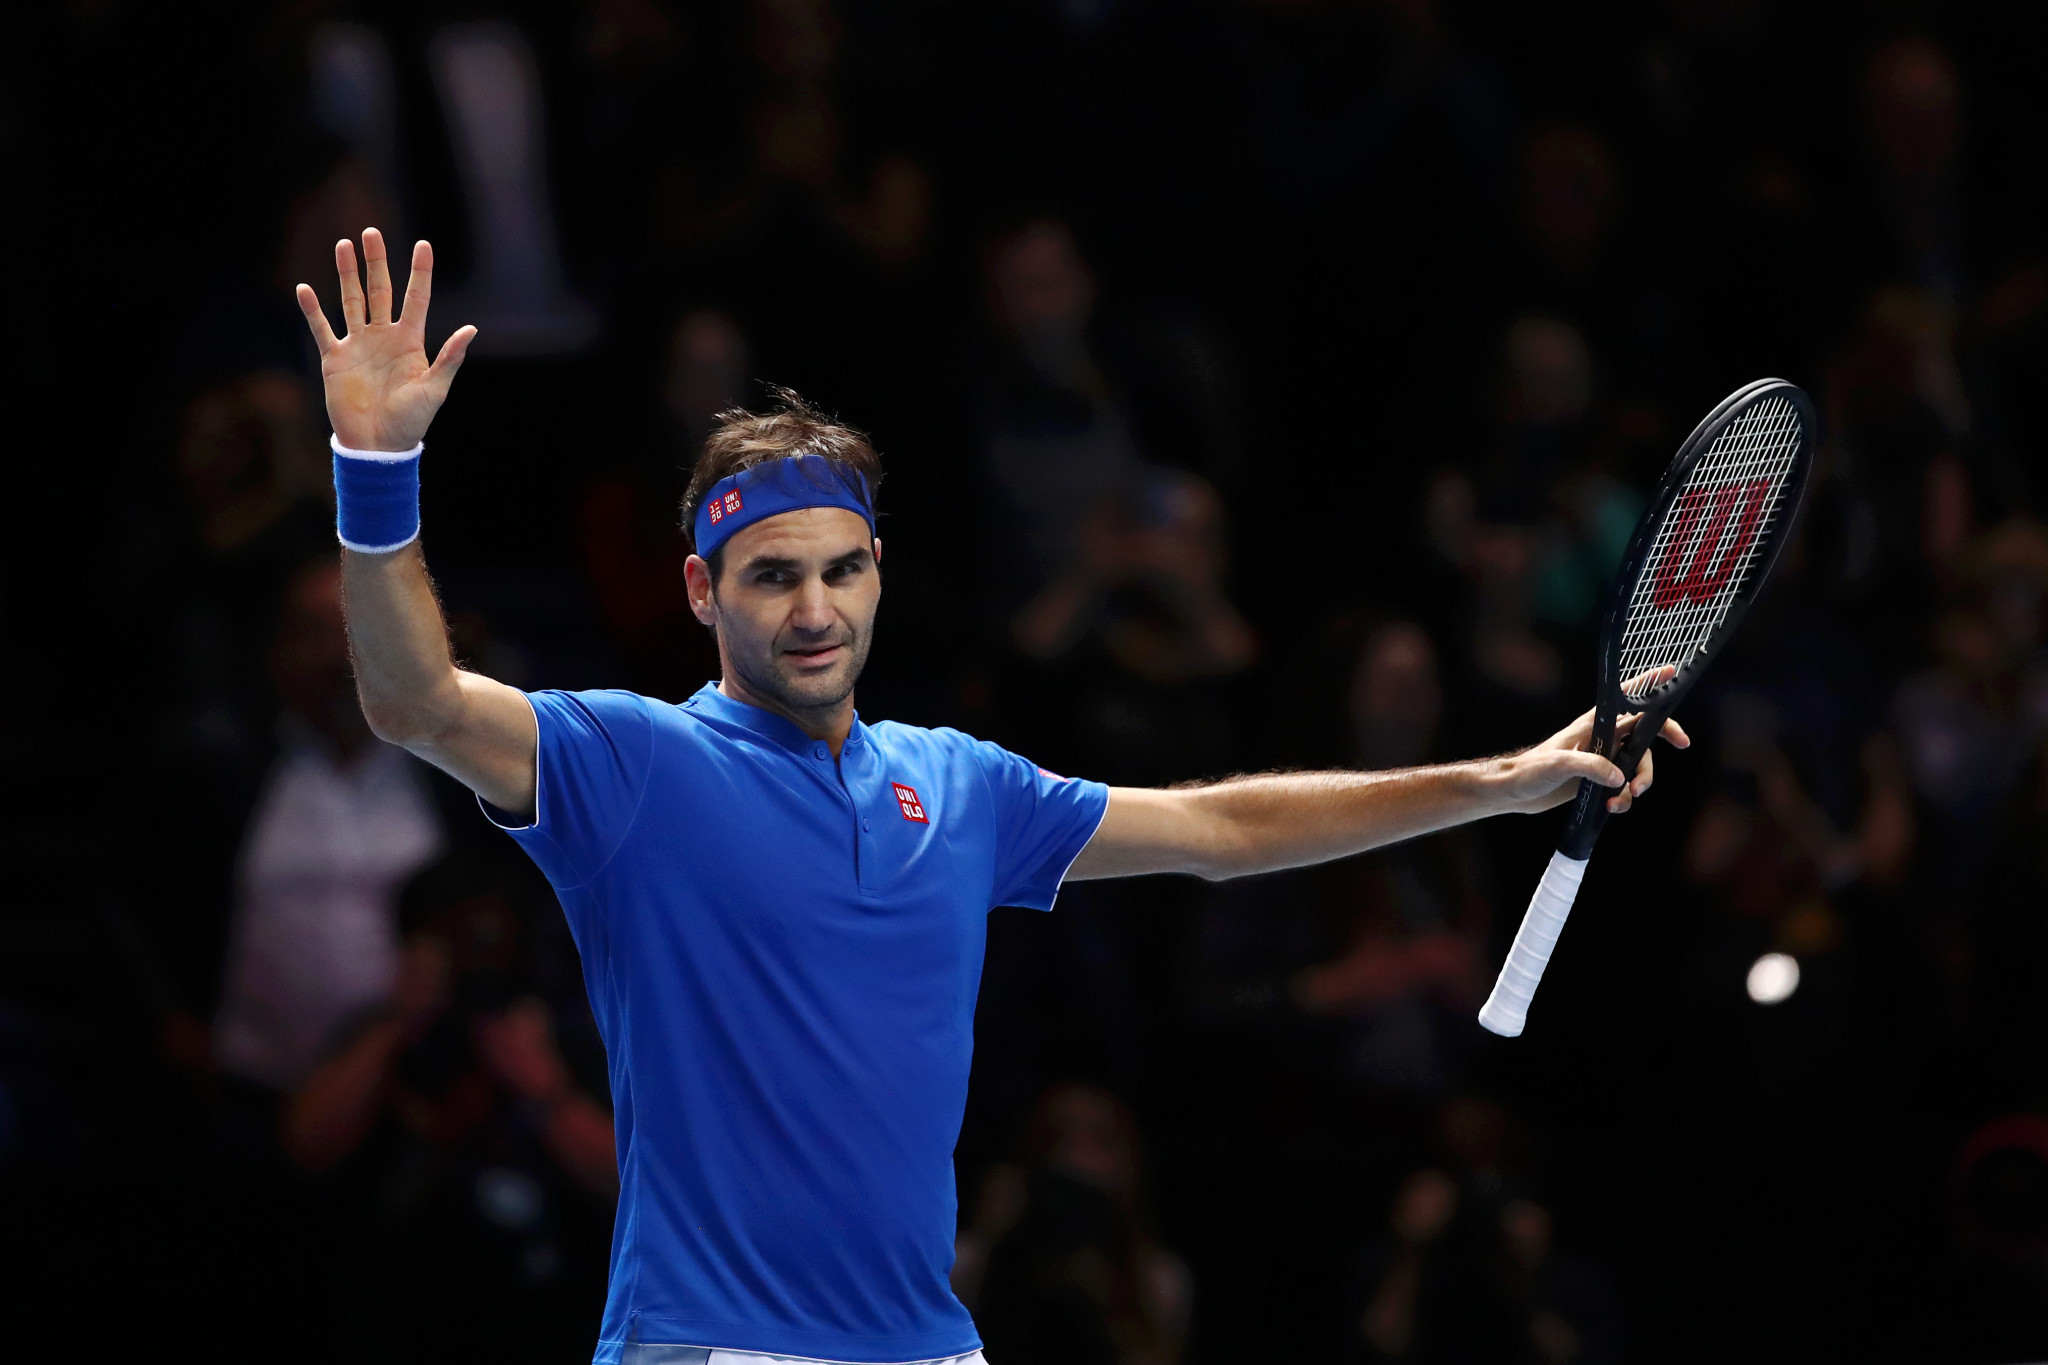  Federer beats Anderson to reach ATP Finals last four as group winner